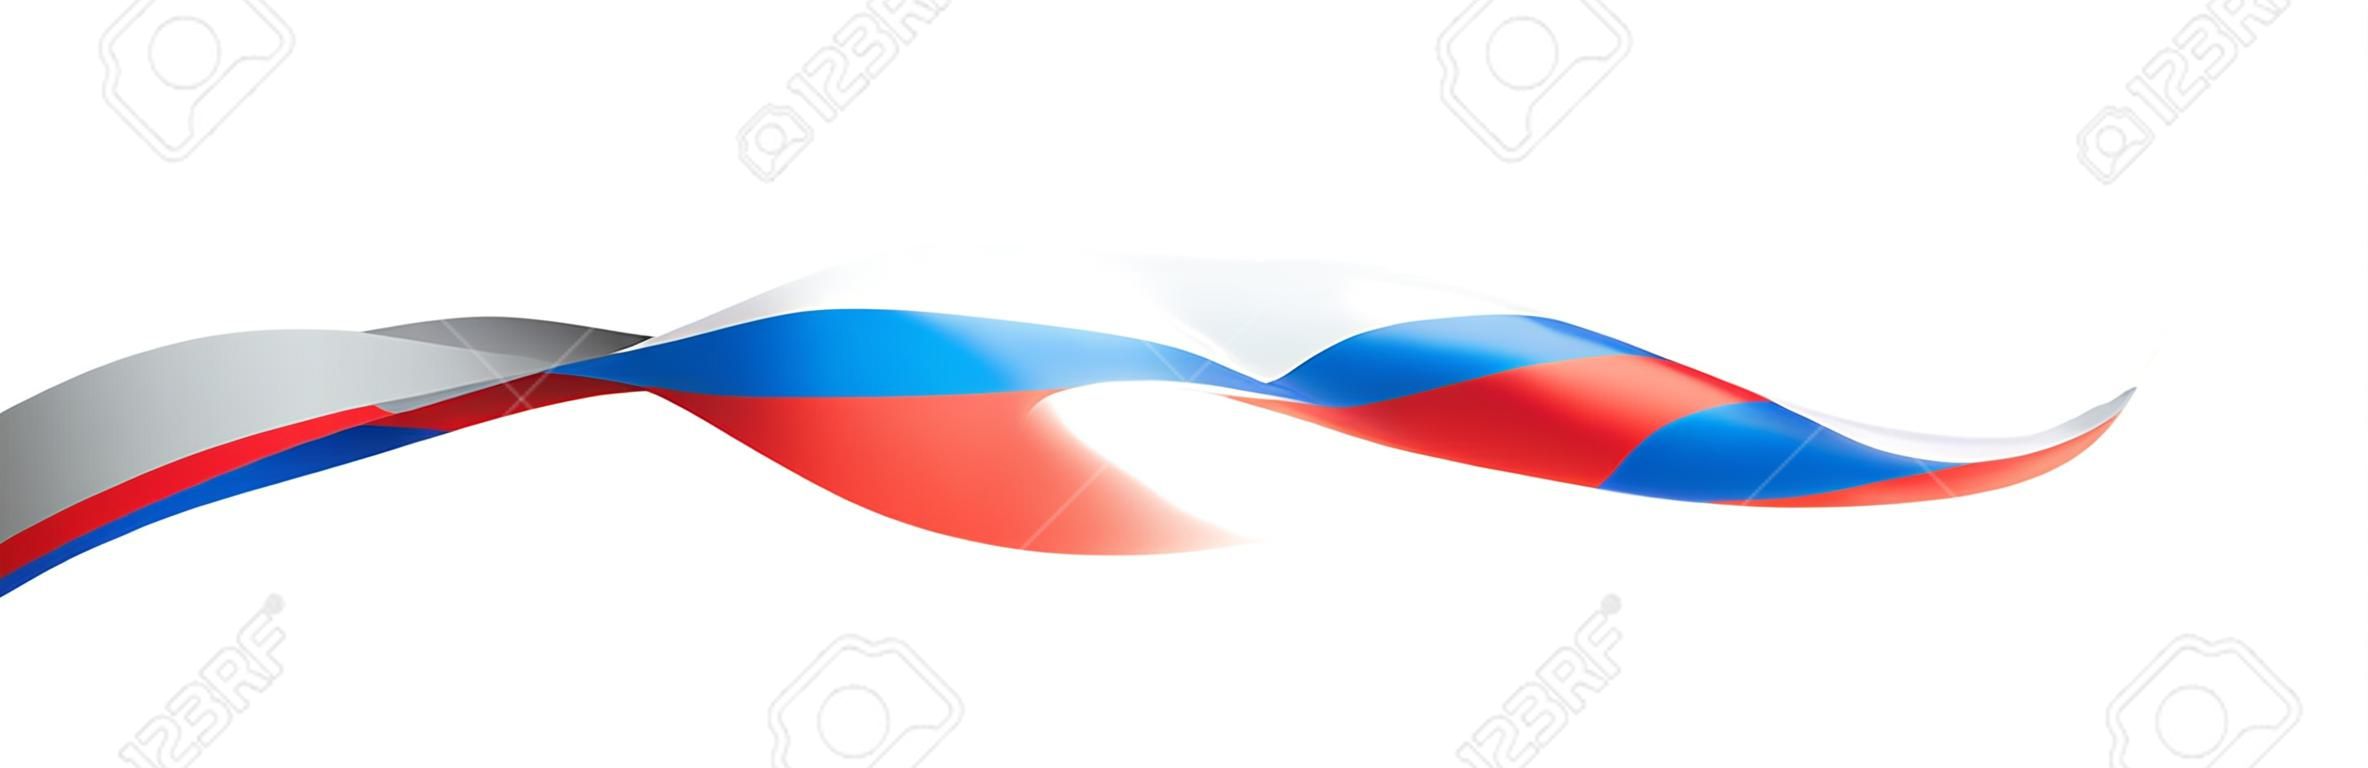 Russia flag, vector illustration on a white background.